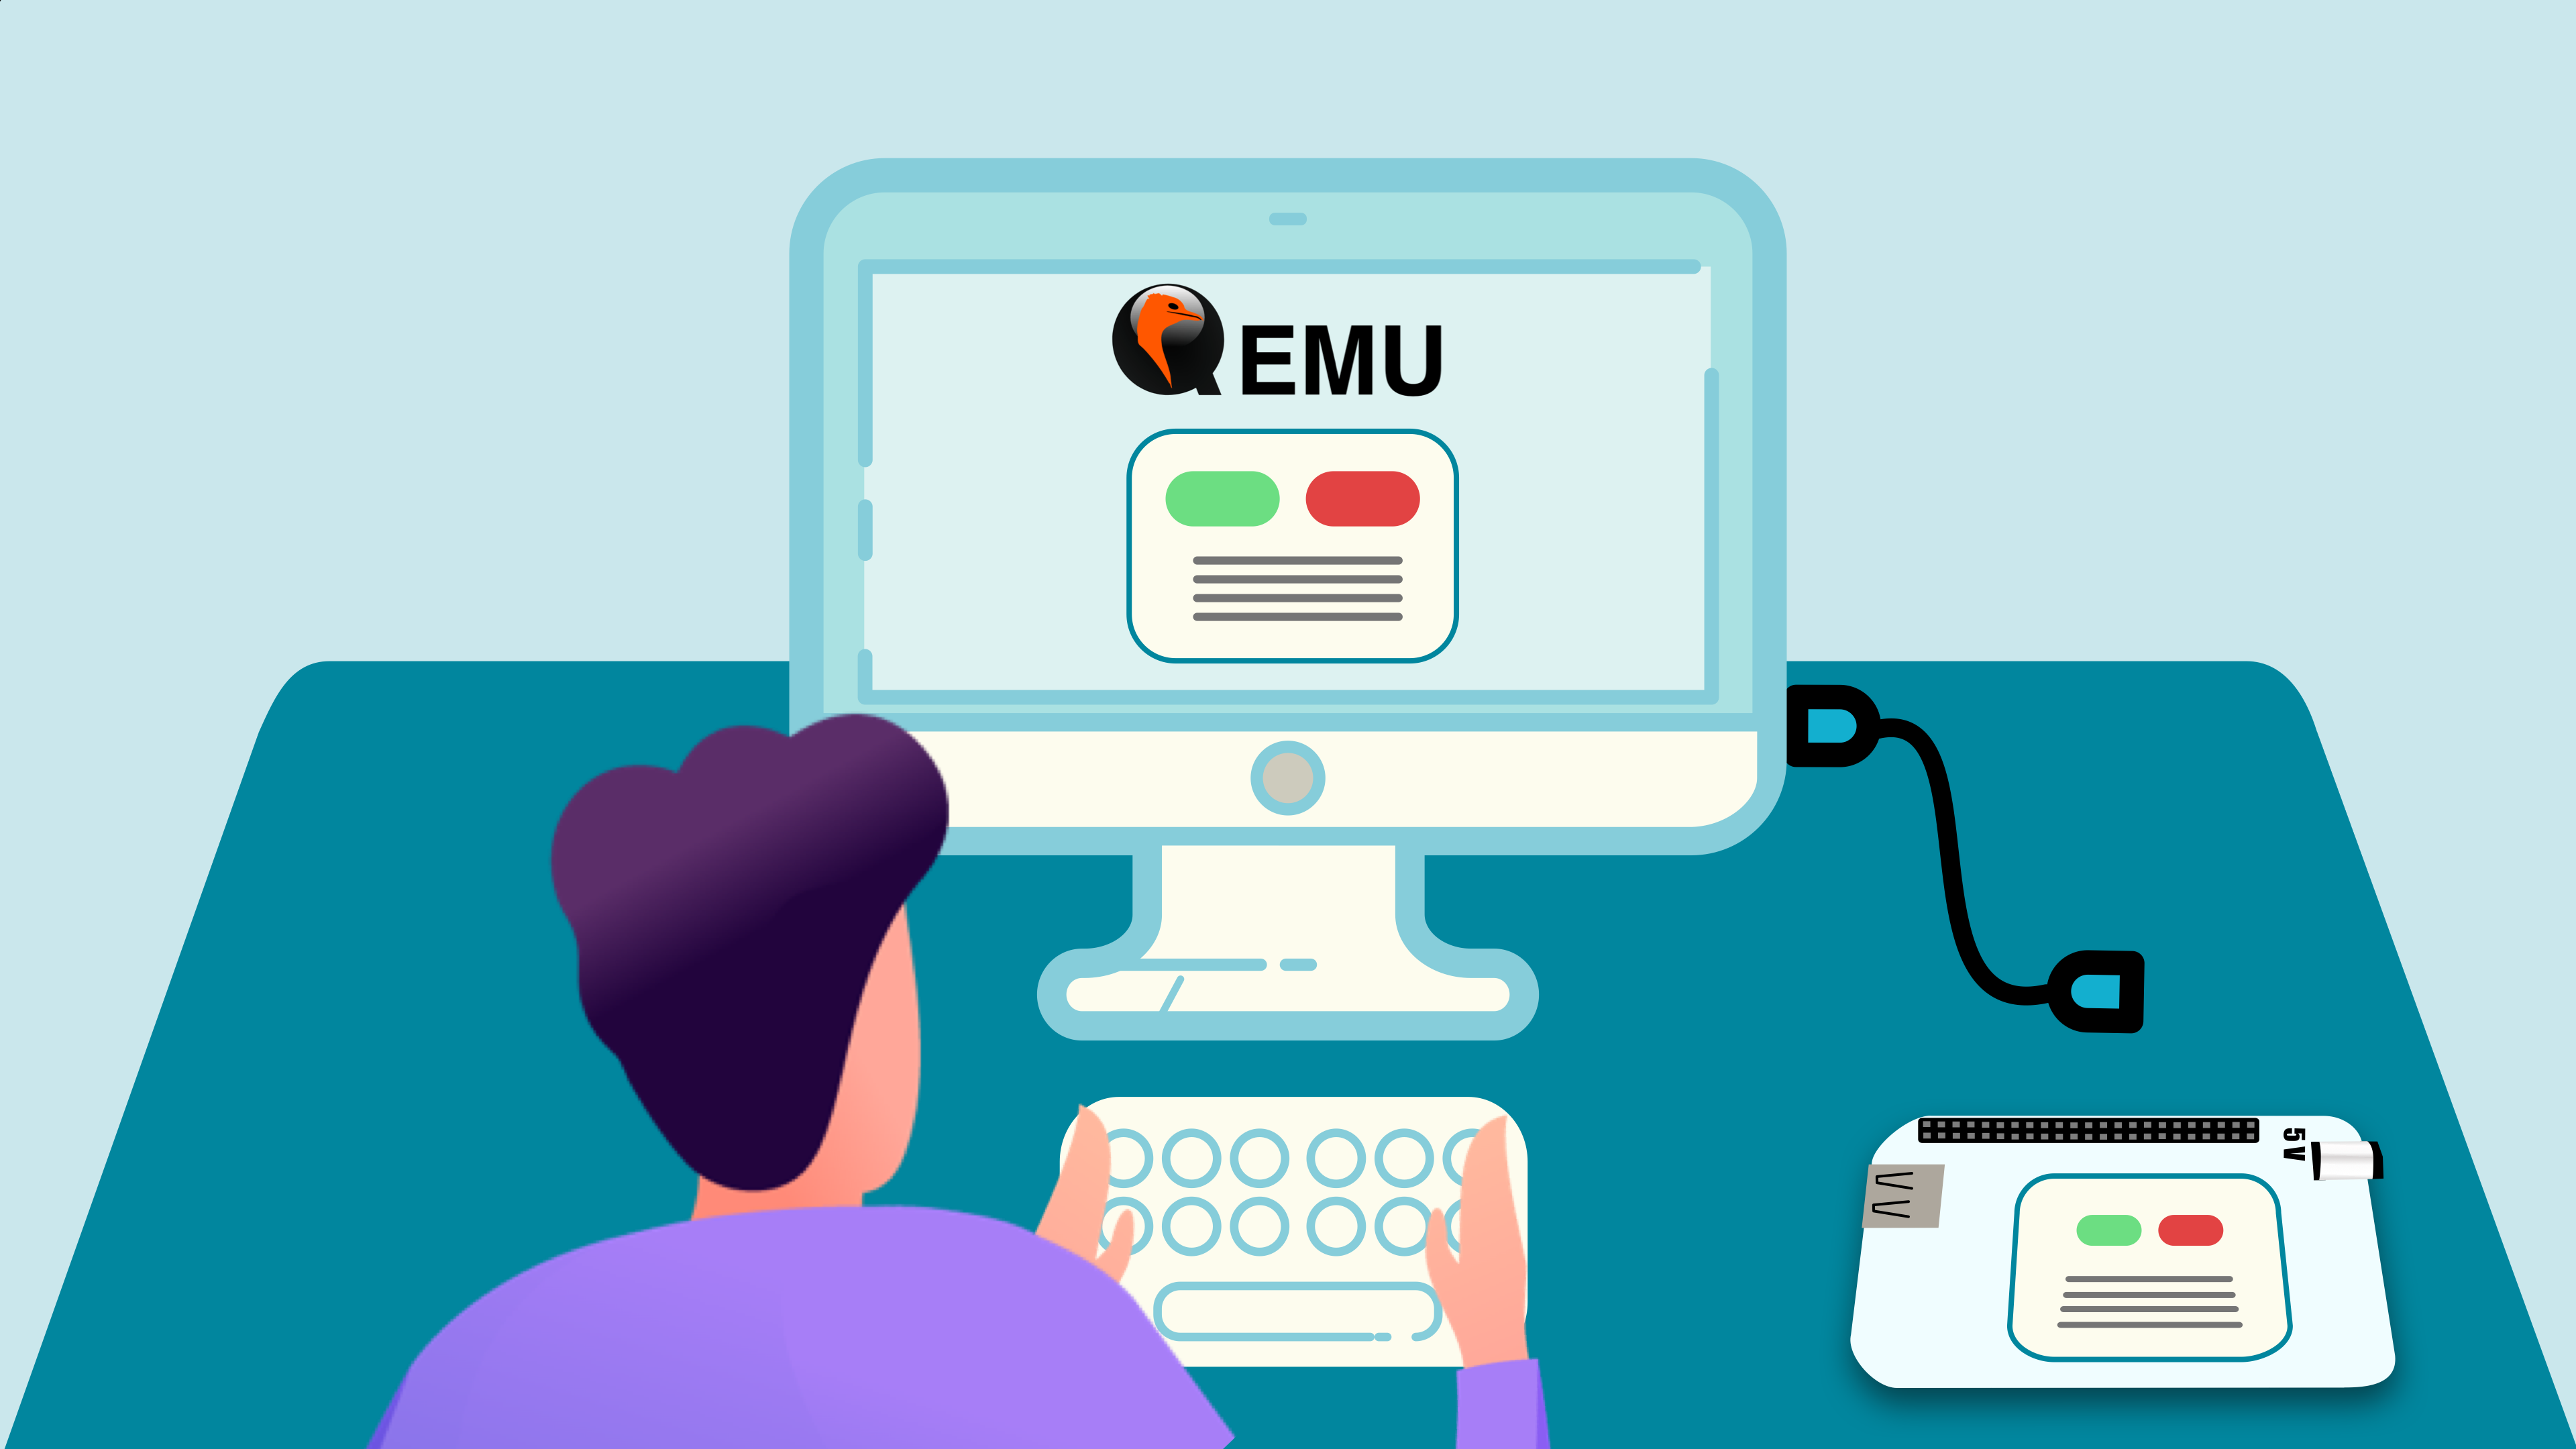 Using QEMU Virtualized Environments to Develop and Deploy Embedded Software for x86 Linux